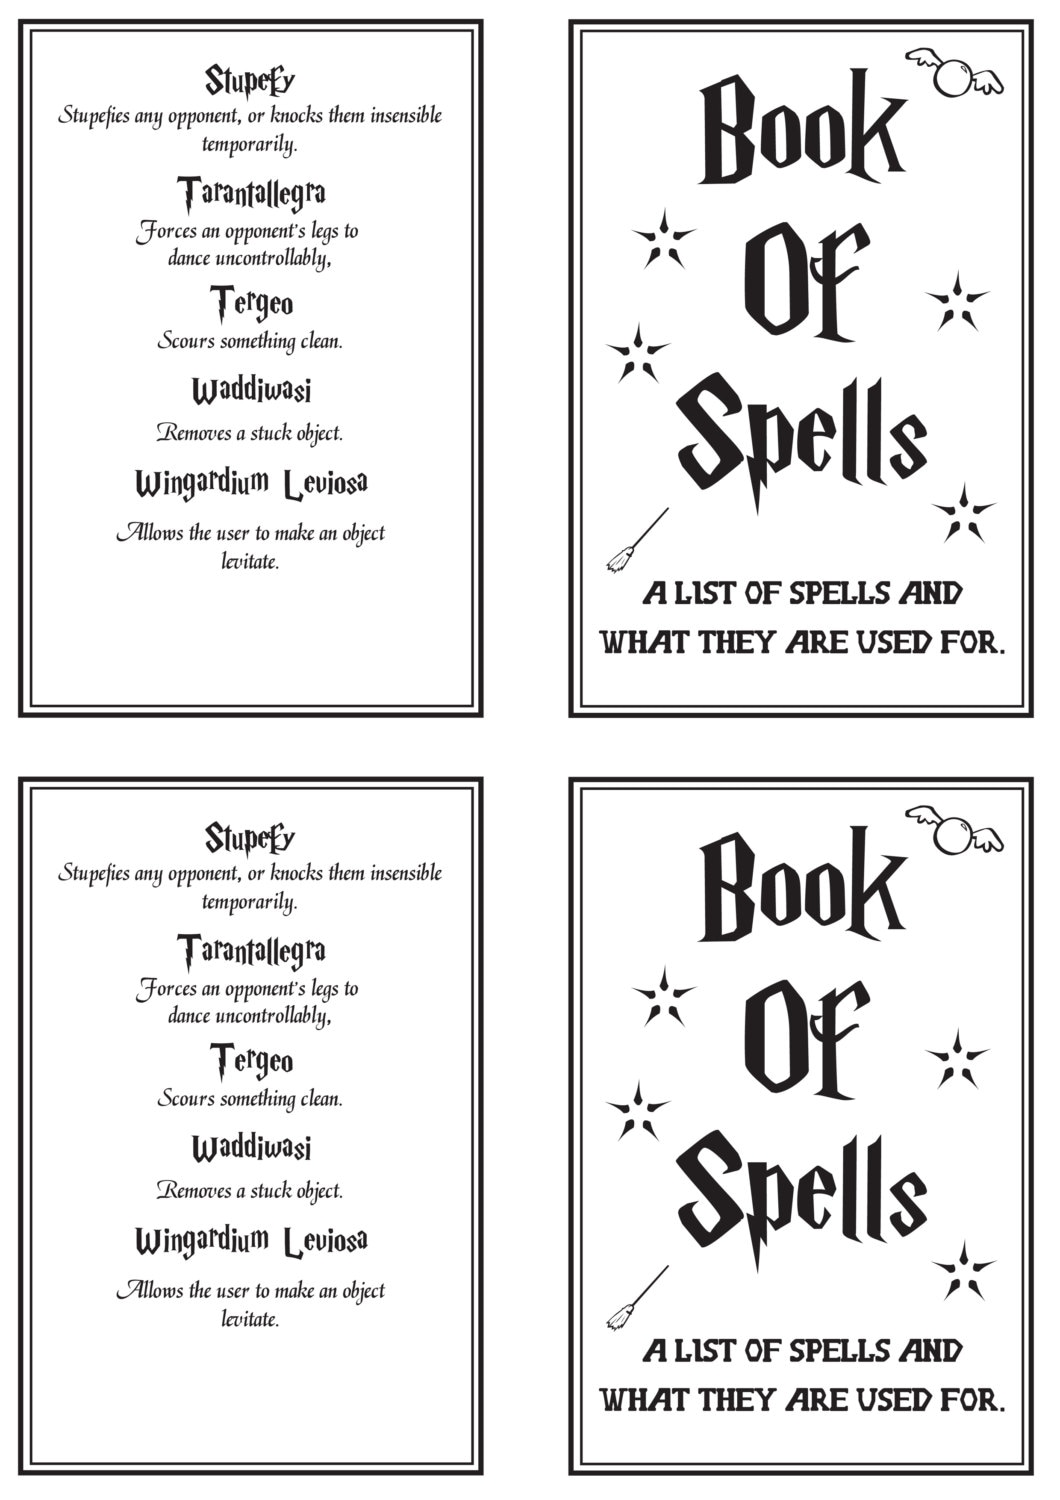 Harry Potter Spells Printable That are Punchy Roy Blog